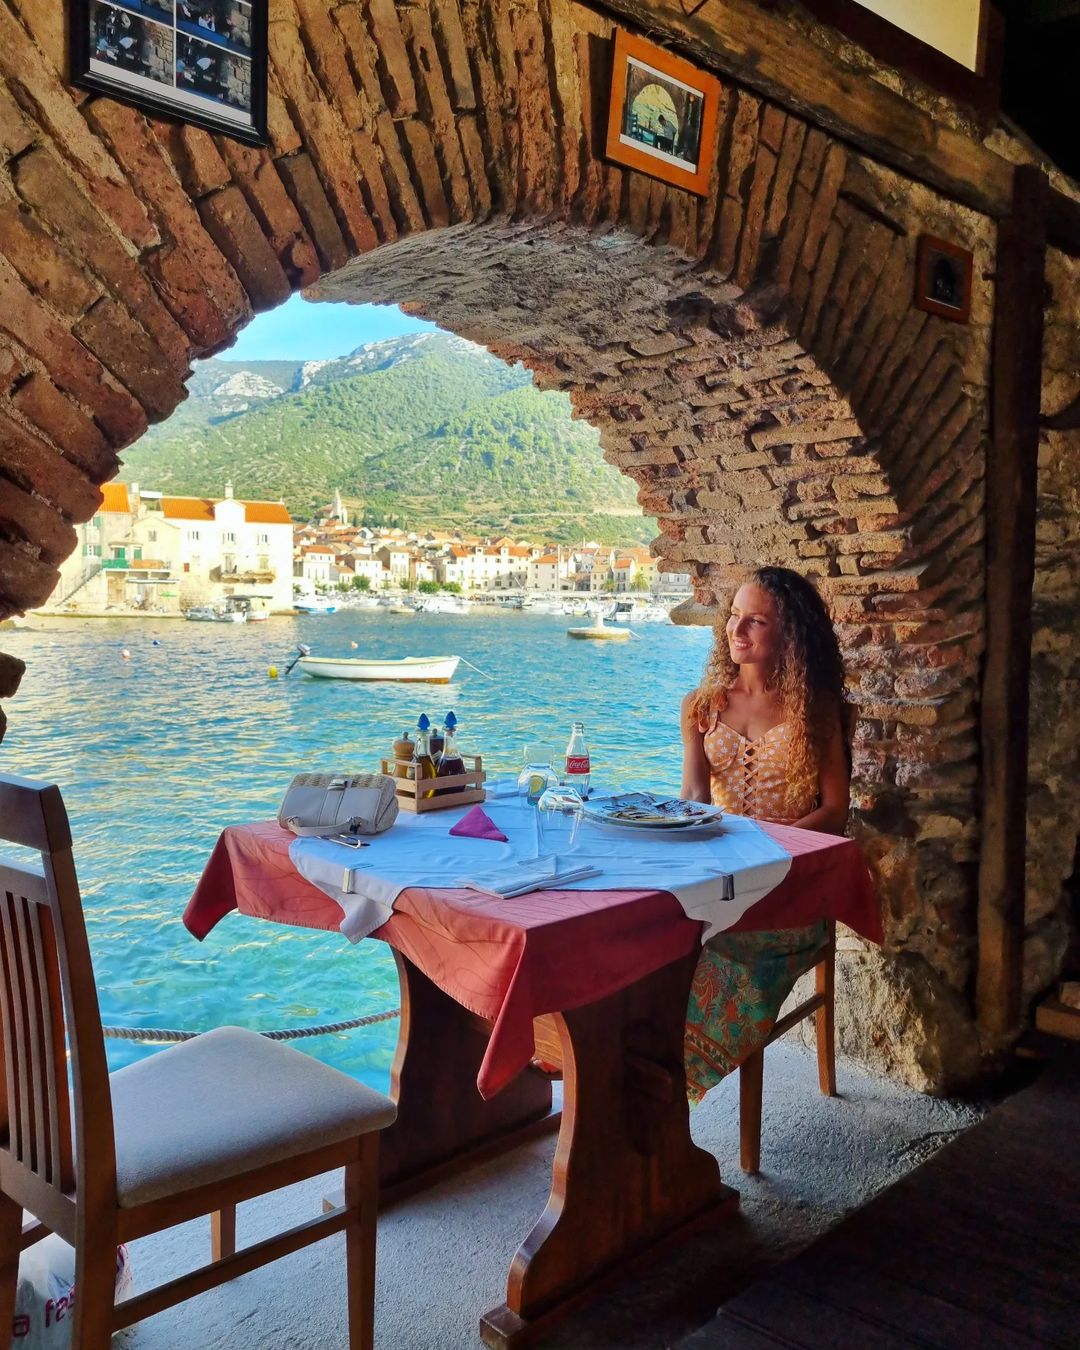 Views over the sea in the picturesque fishing village of Komiza - Best Outdoor Restaurants in Europe